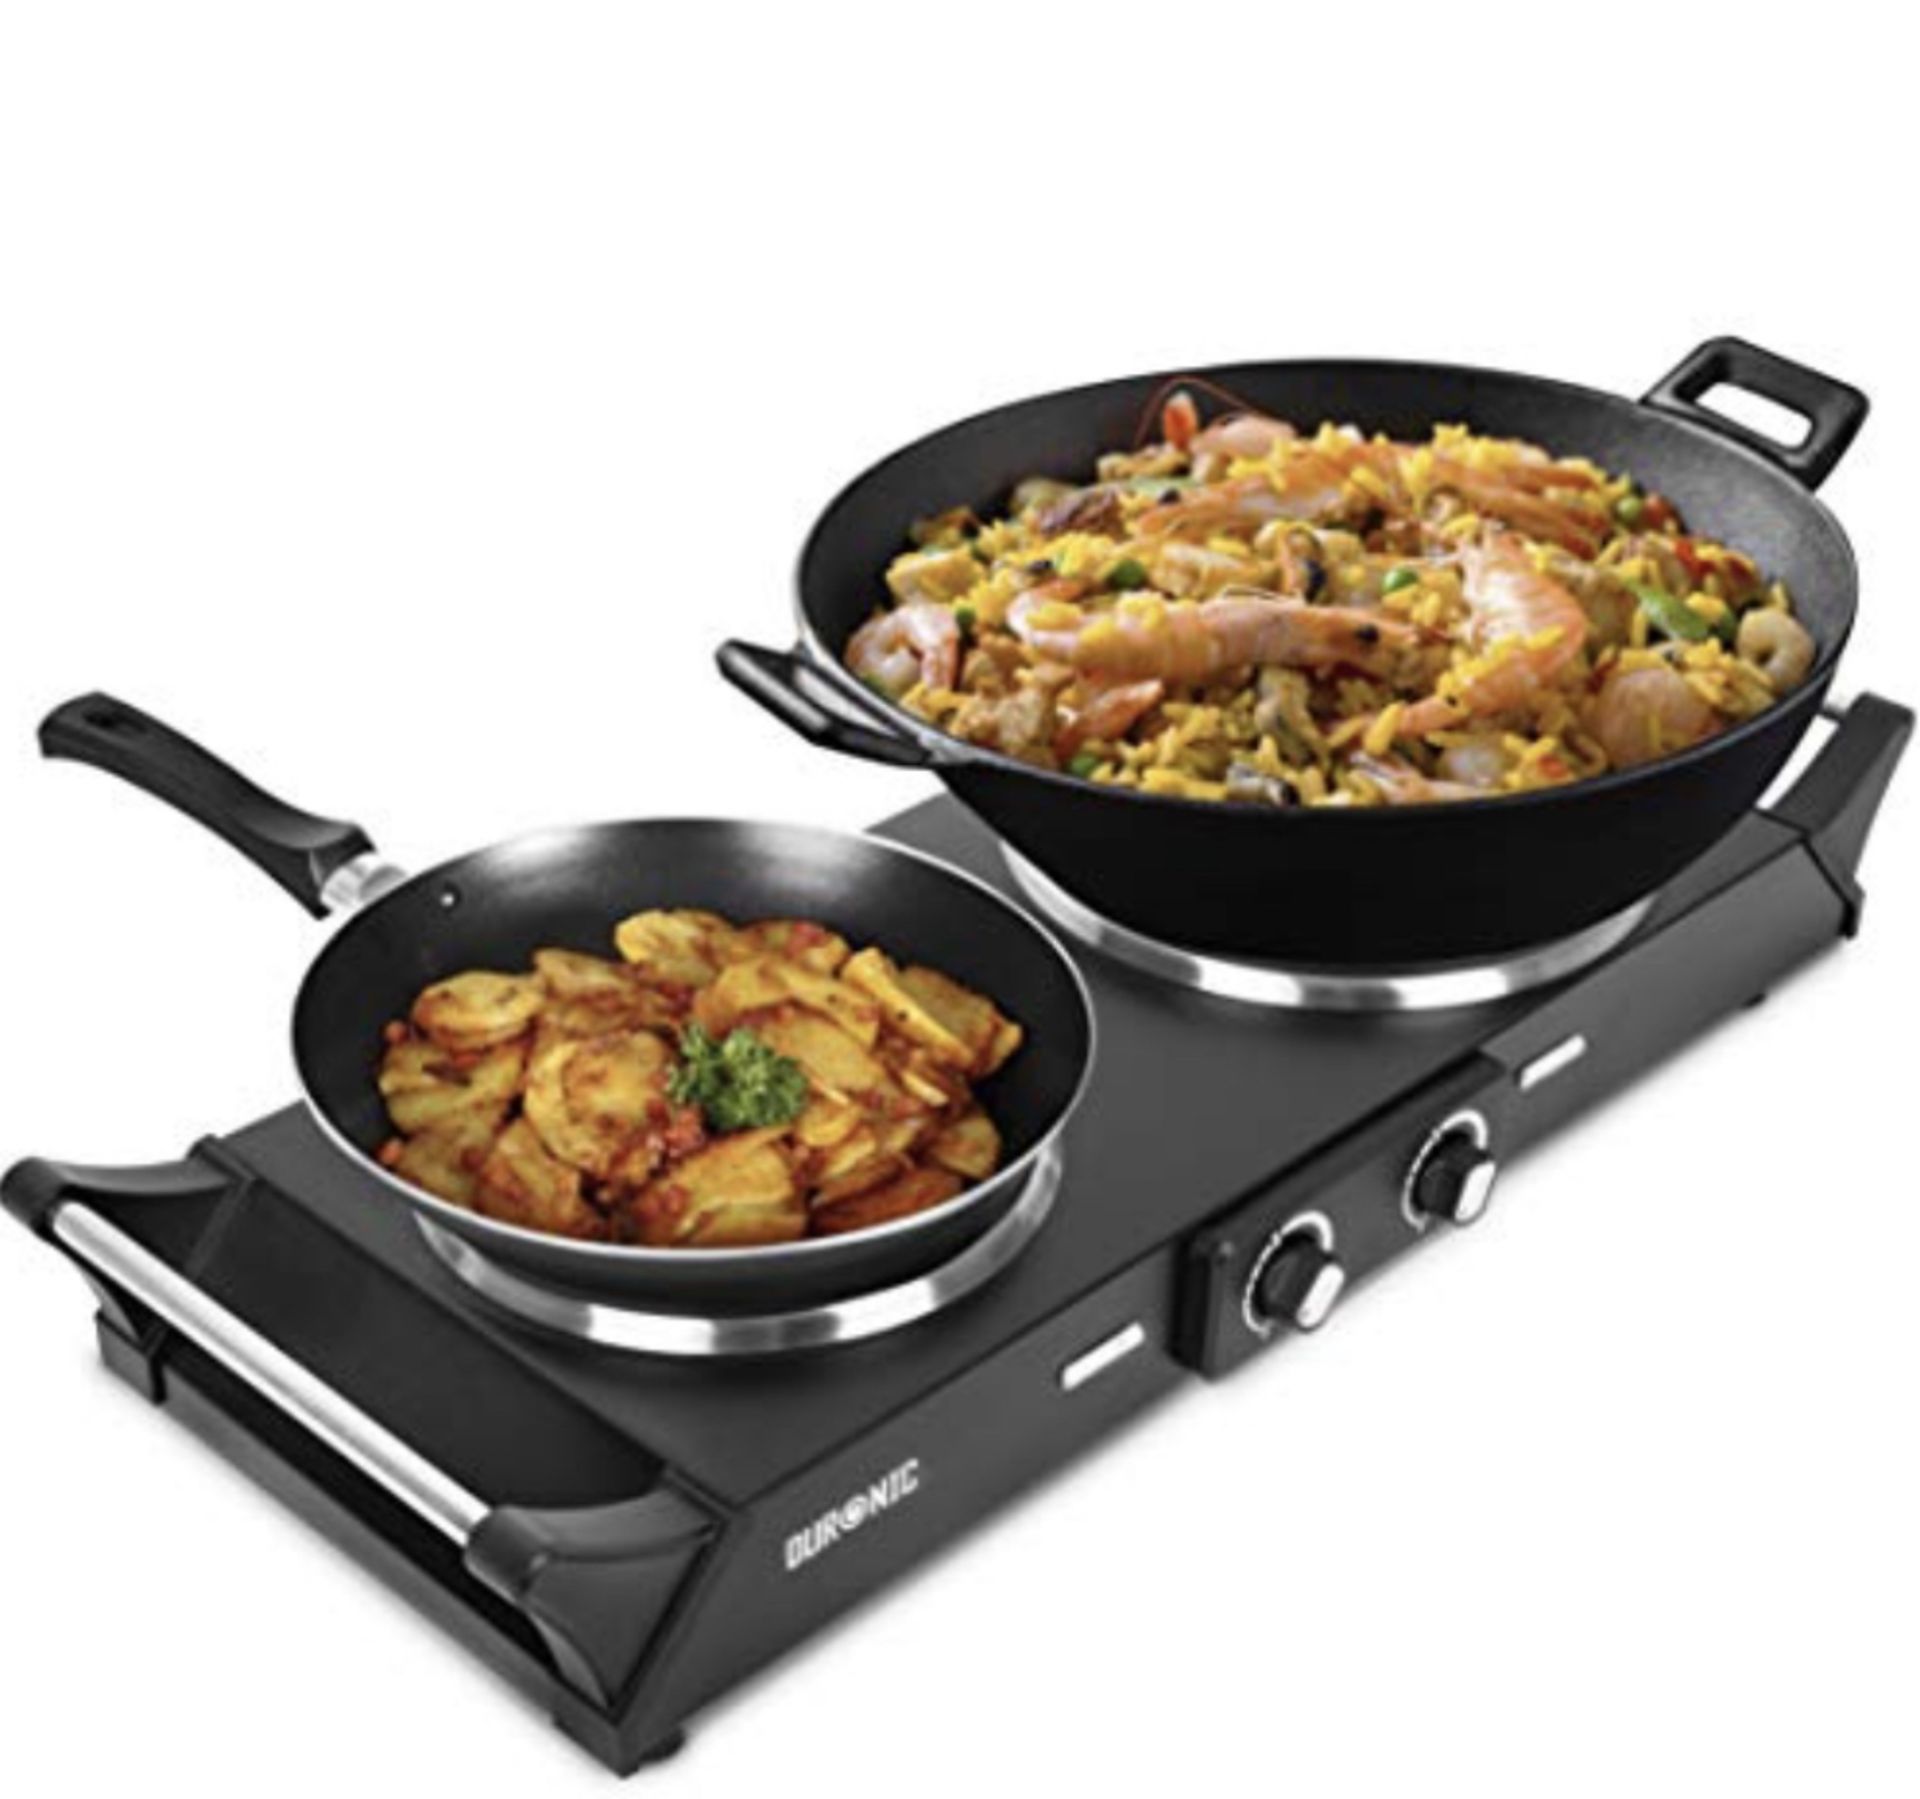 Duronic Hot Plate, Table Top Cooking Electric Hob RRP £42.99